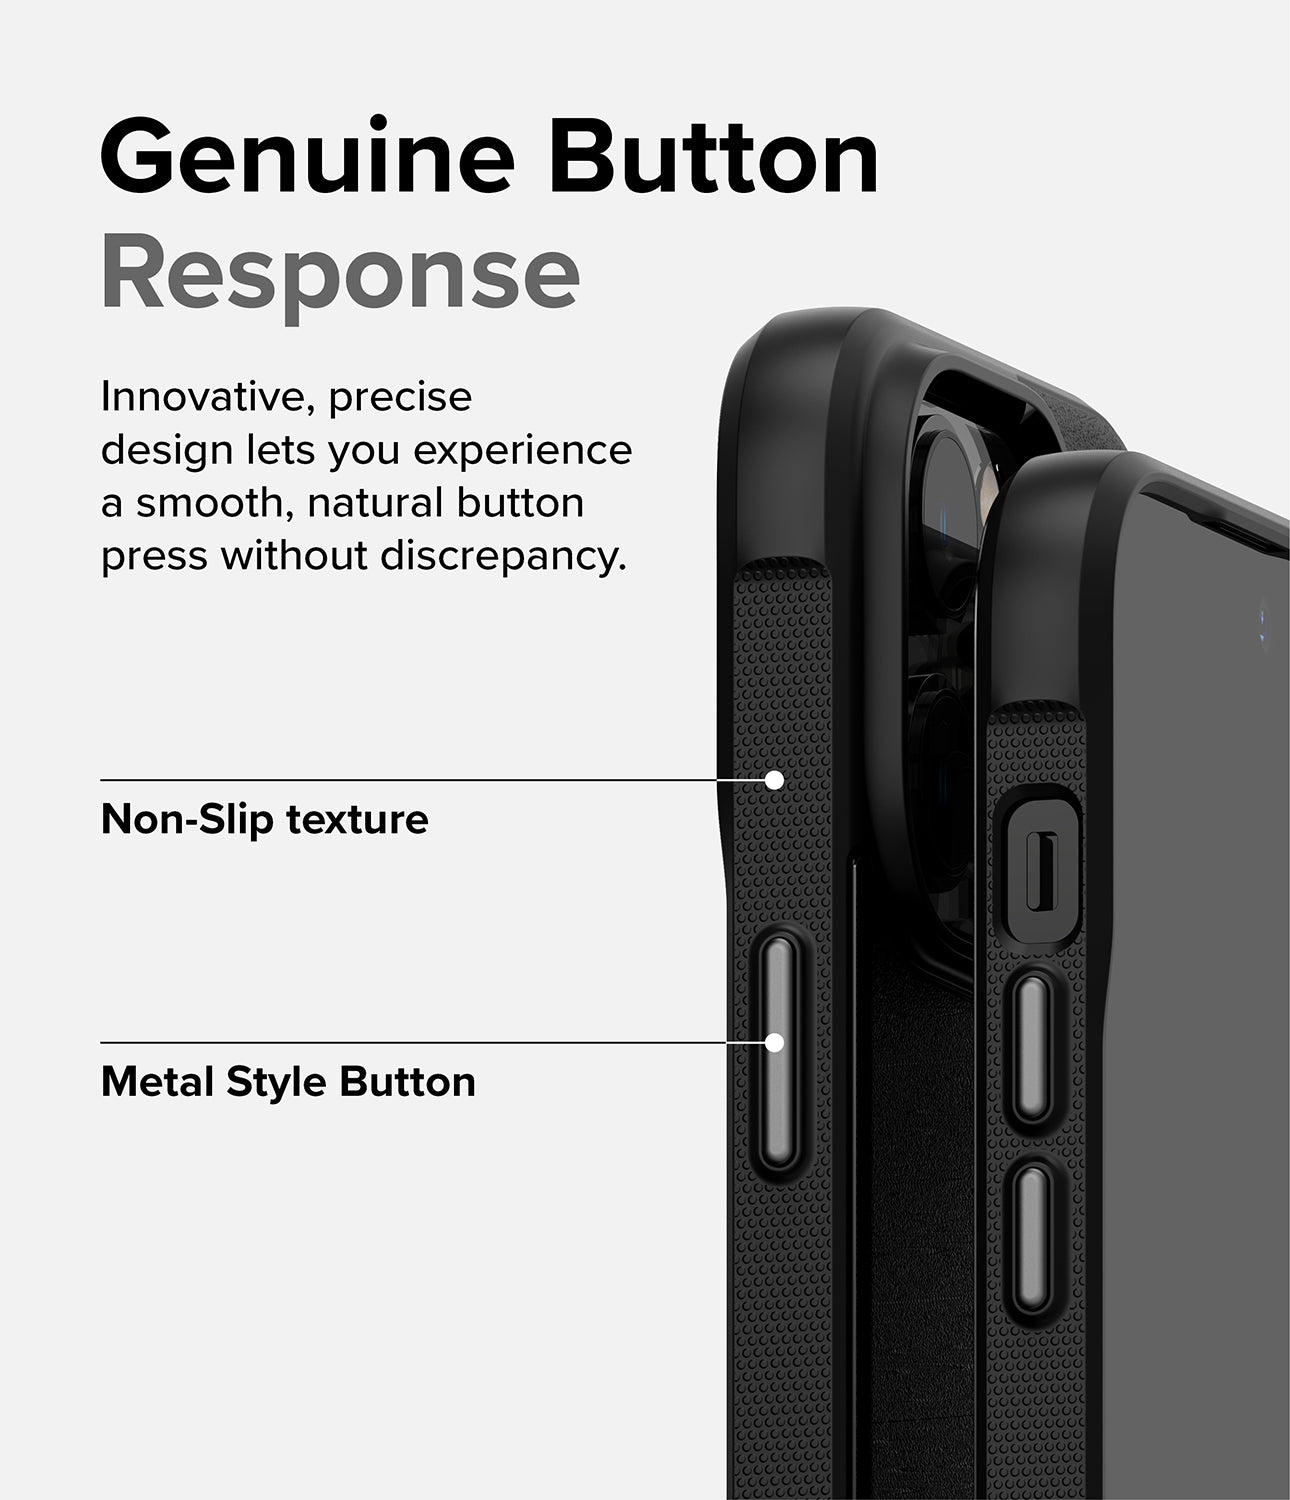 Genuine Button Response l Innovative, Precise design lets you experience a smooth, natural button press without discrepancy. Non-Slip texture. Metal Style Button